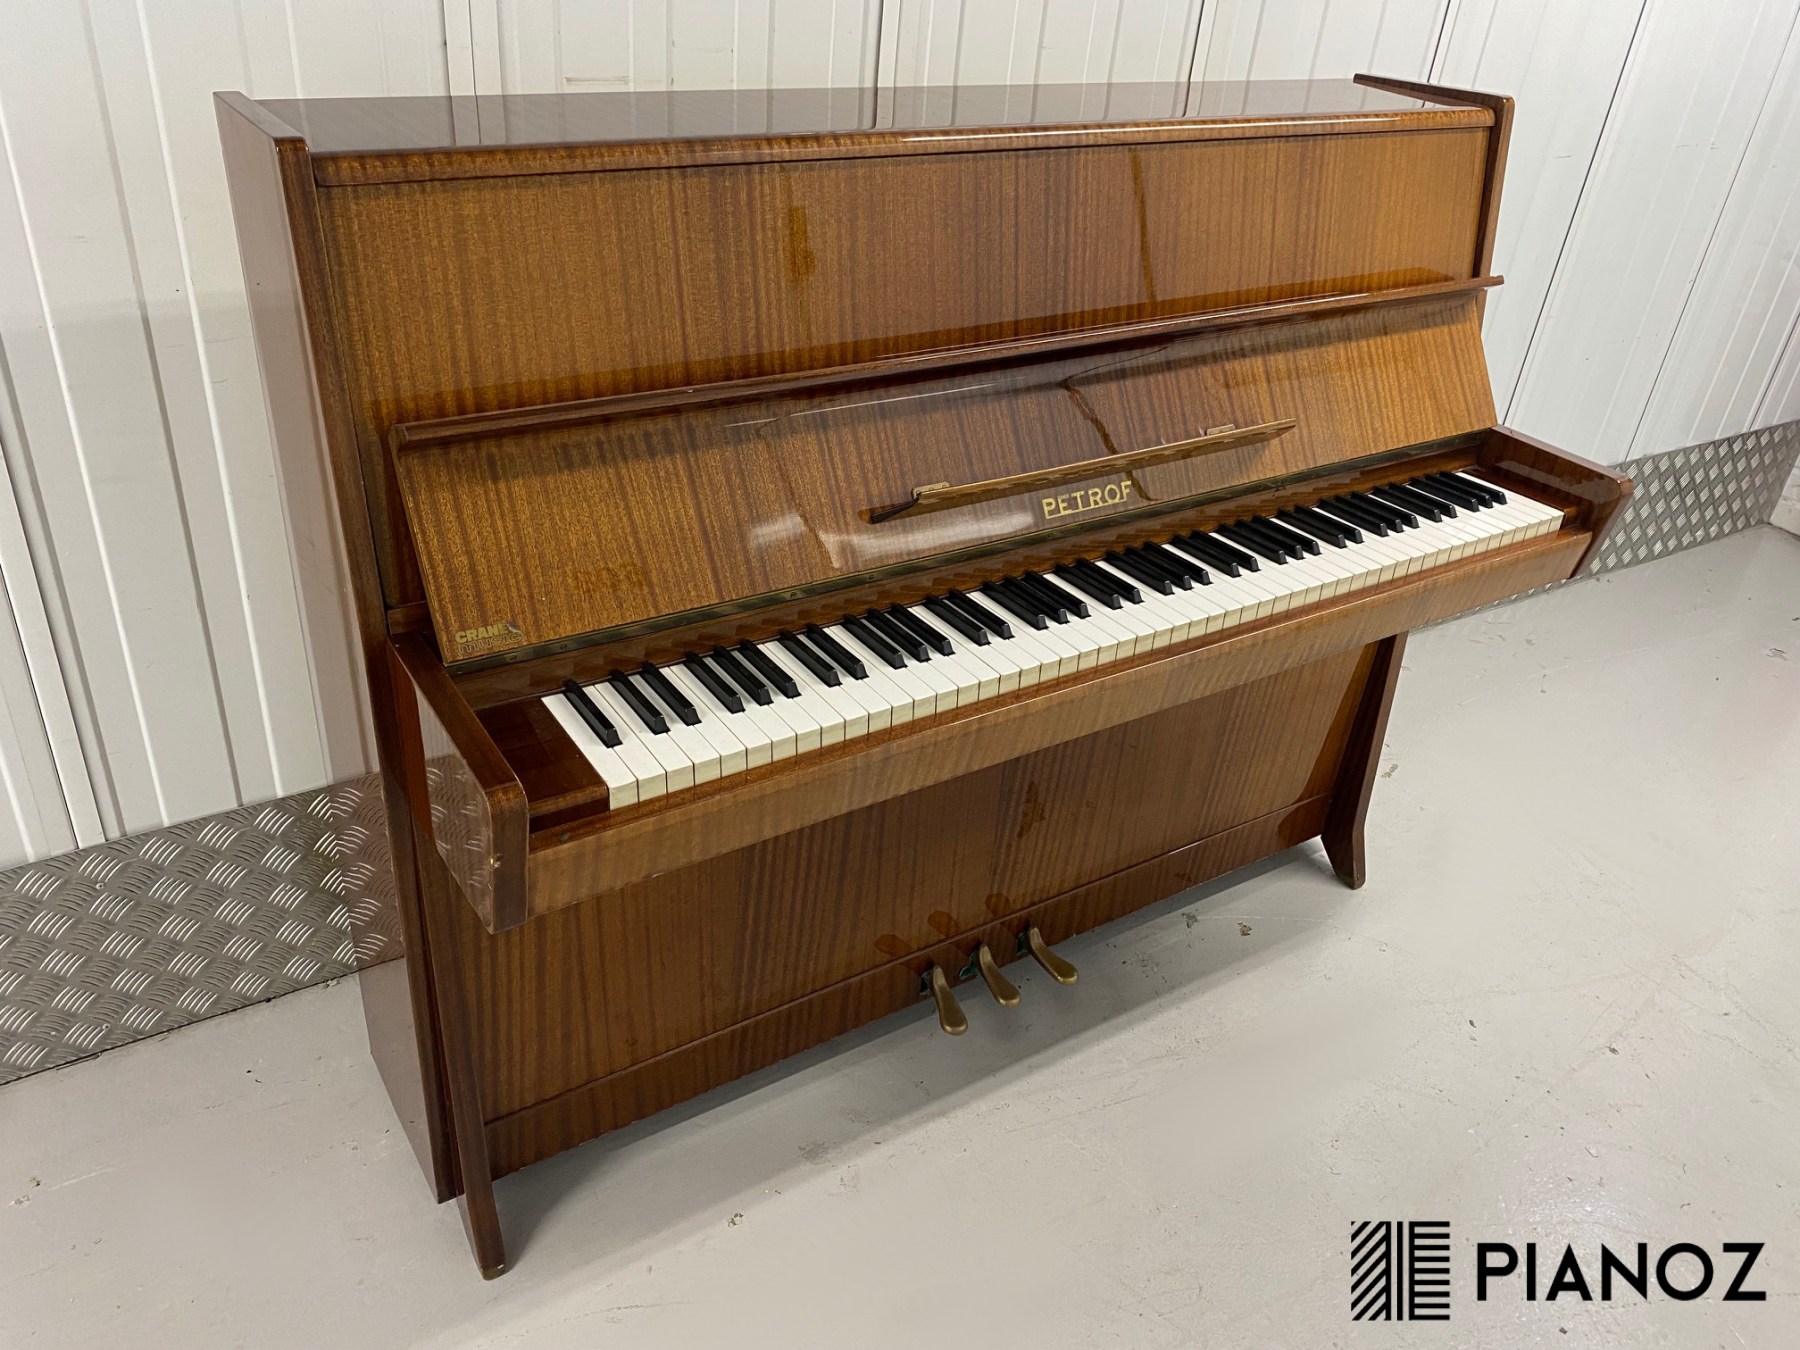 Petrof 114 Upright Piano piano for sale in UK